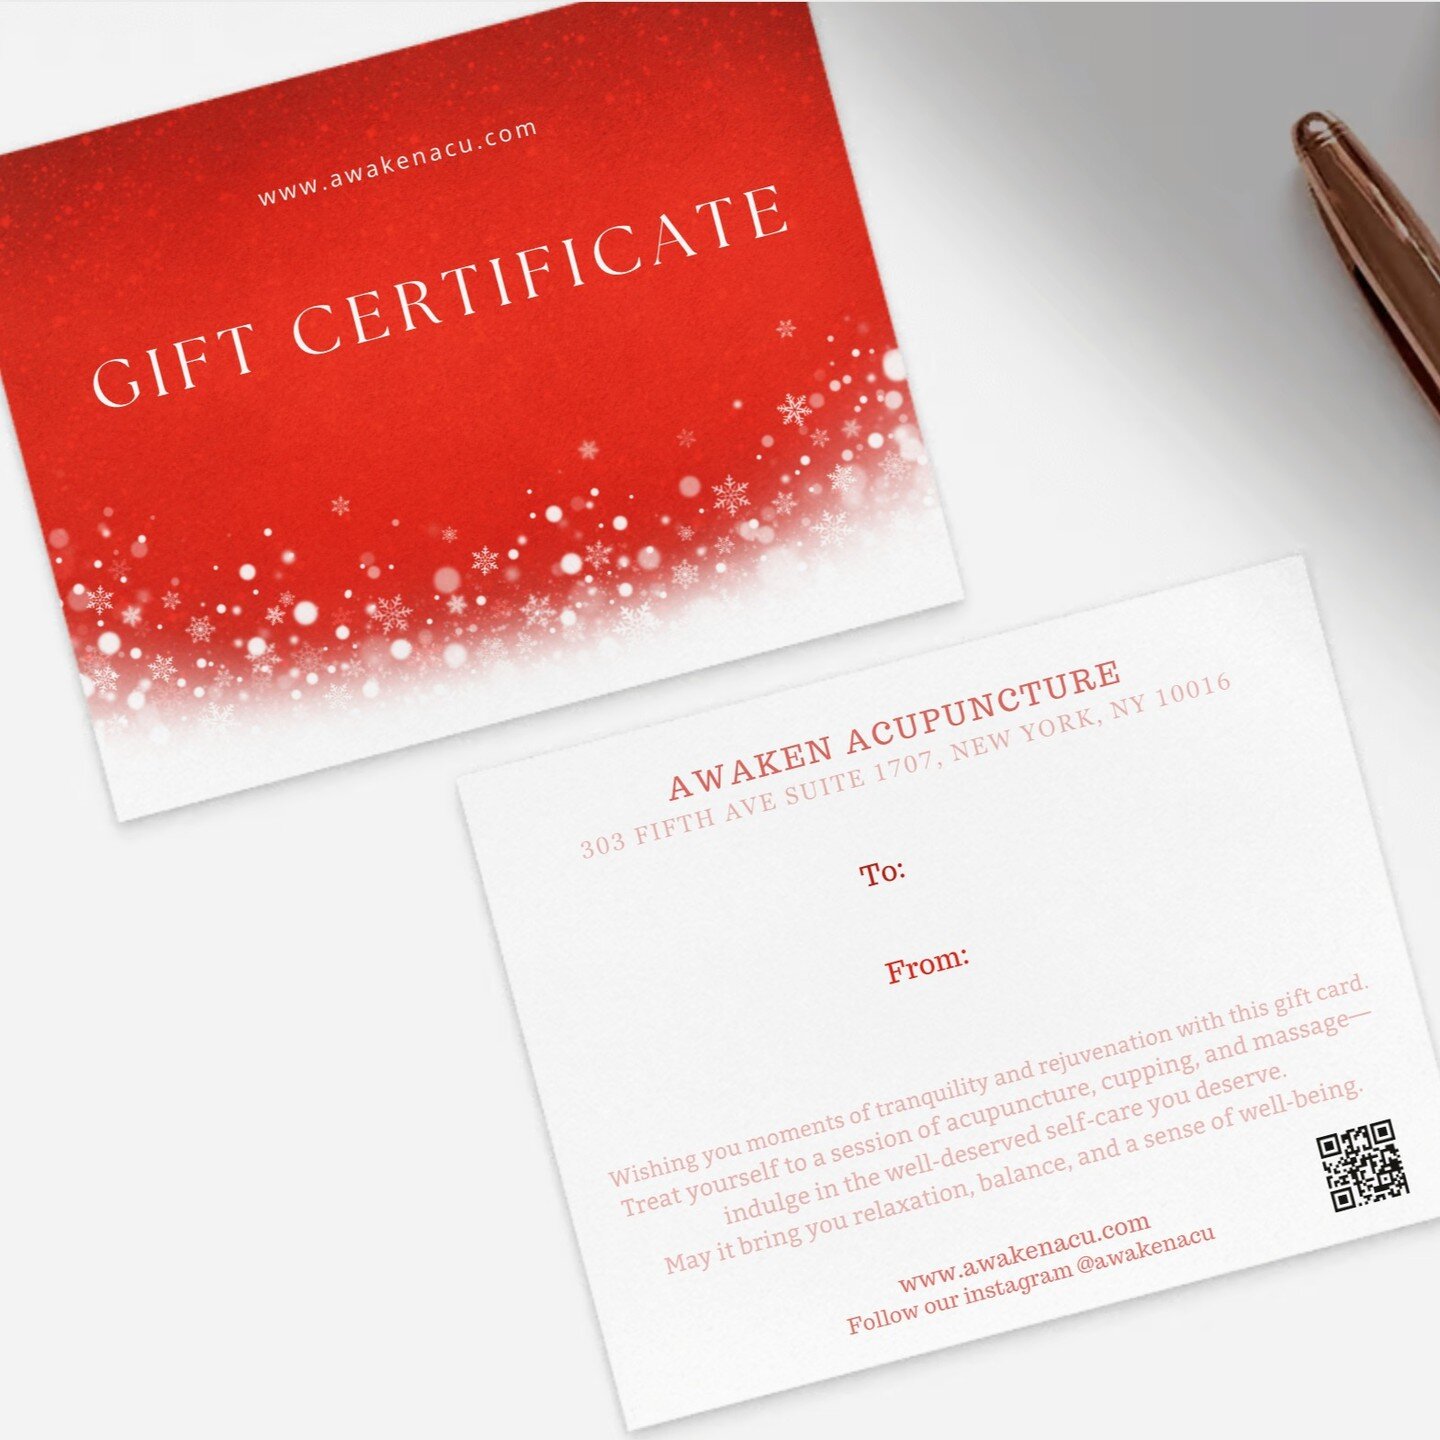 Anticipation is in the air as our Gift Certificate makes its way to you. Embrace the joy of giving by offering the best gift to your family, friends, or even treating yourself in this heartwarming season. This certificate is more than just a present;